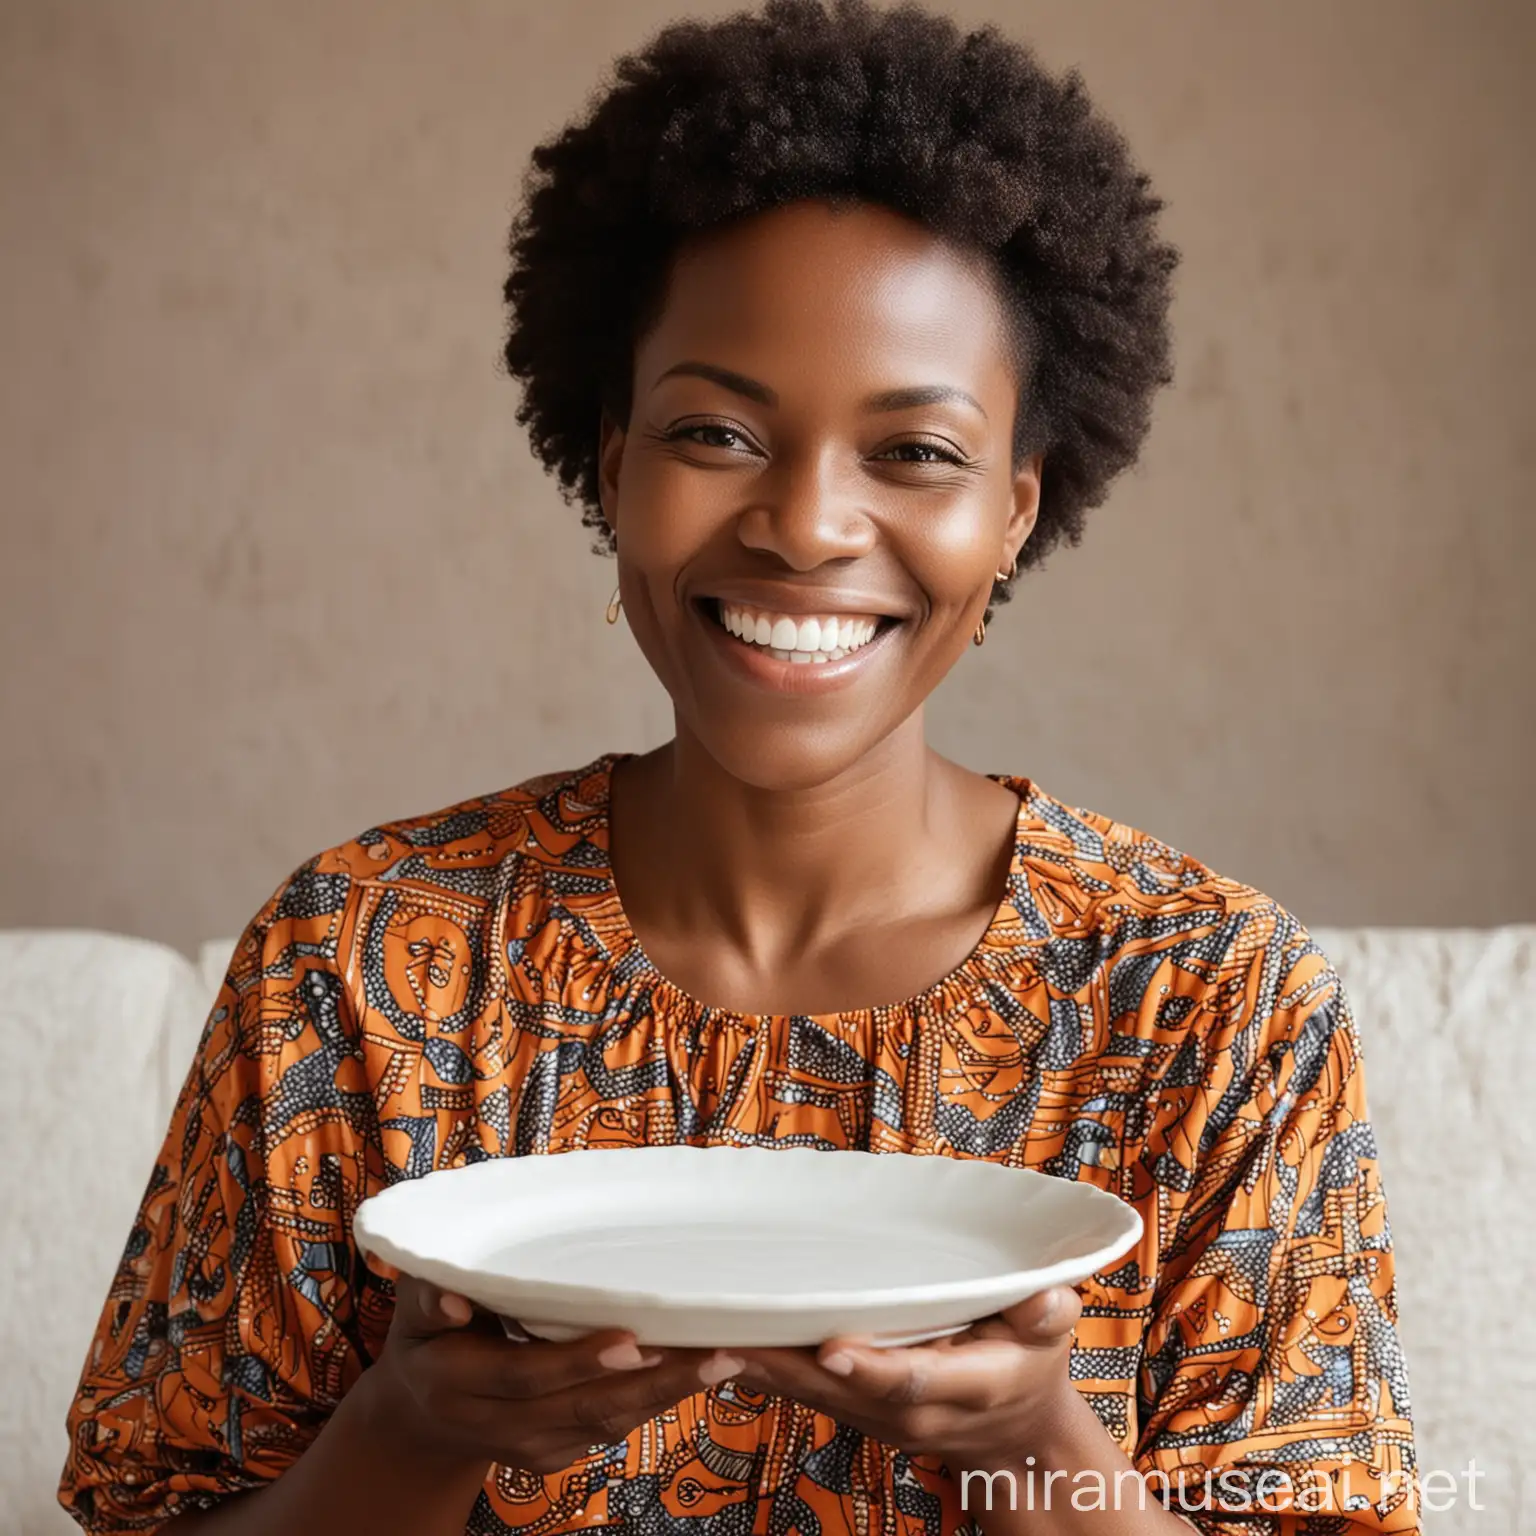 African Mother smiling holding a plate